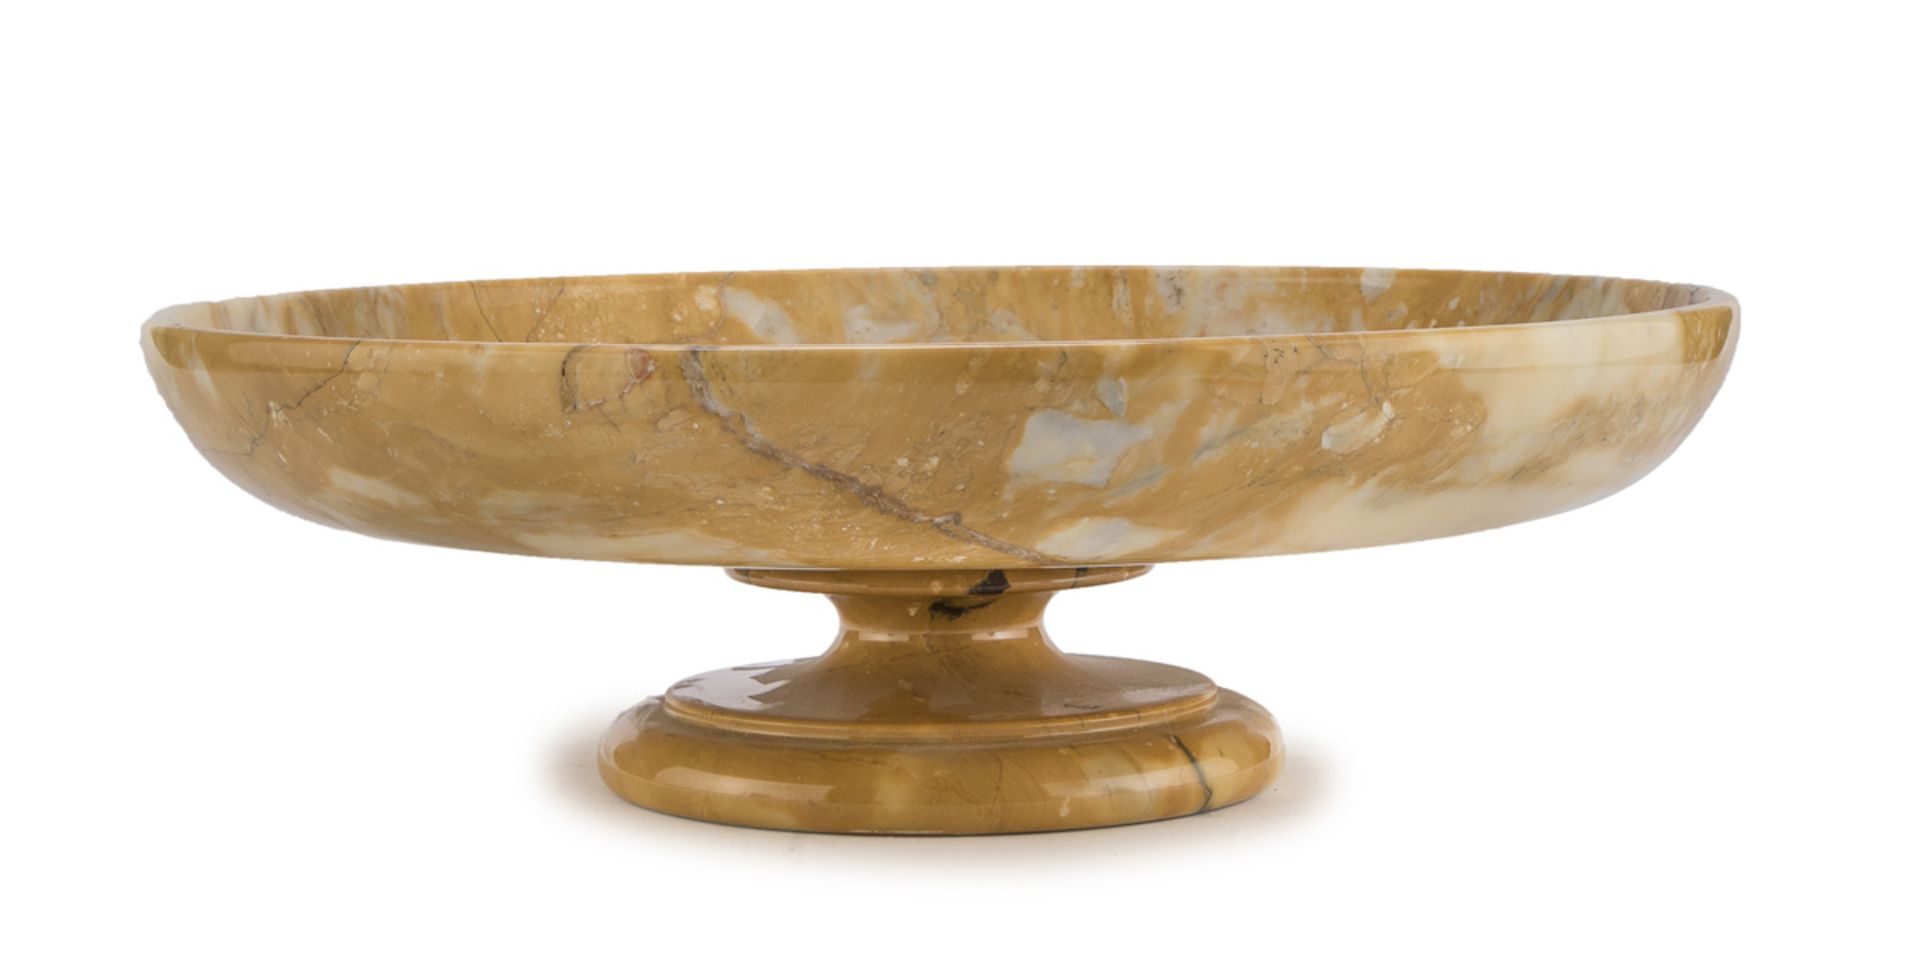 LARGE CENTERPIECE IN YELLOW SIENA MARBLE 20TH CENTURY